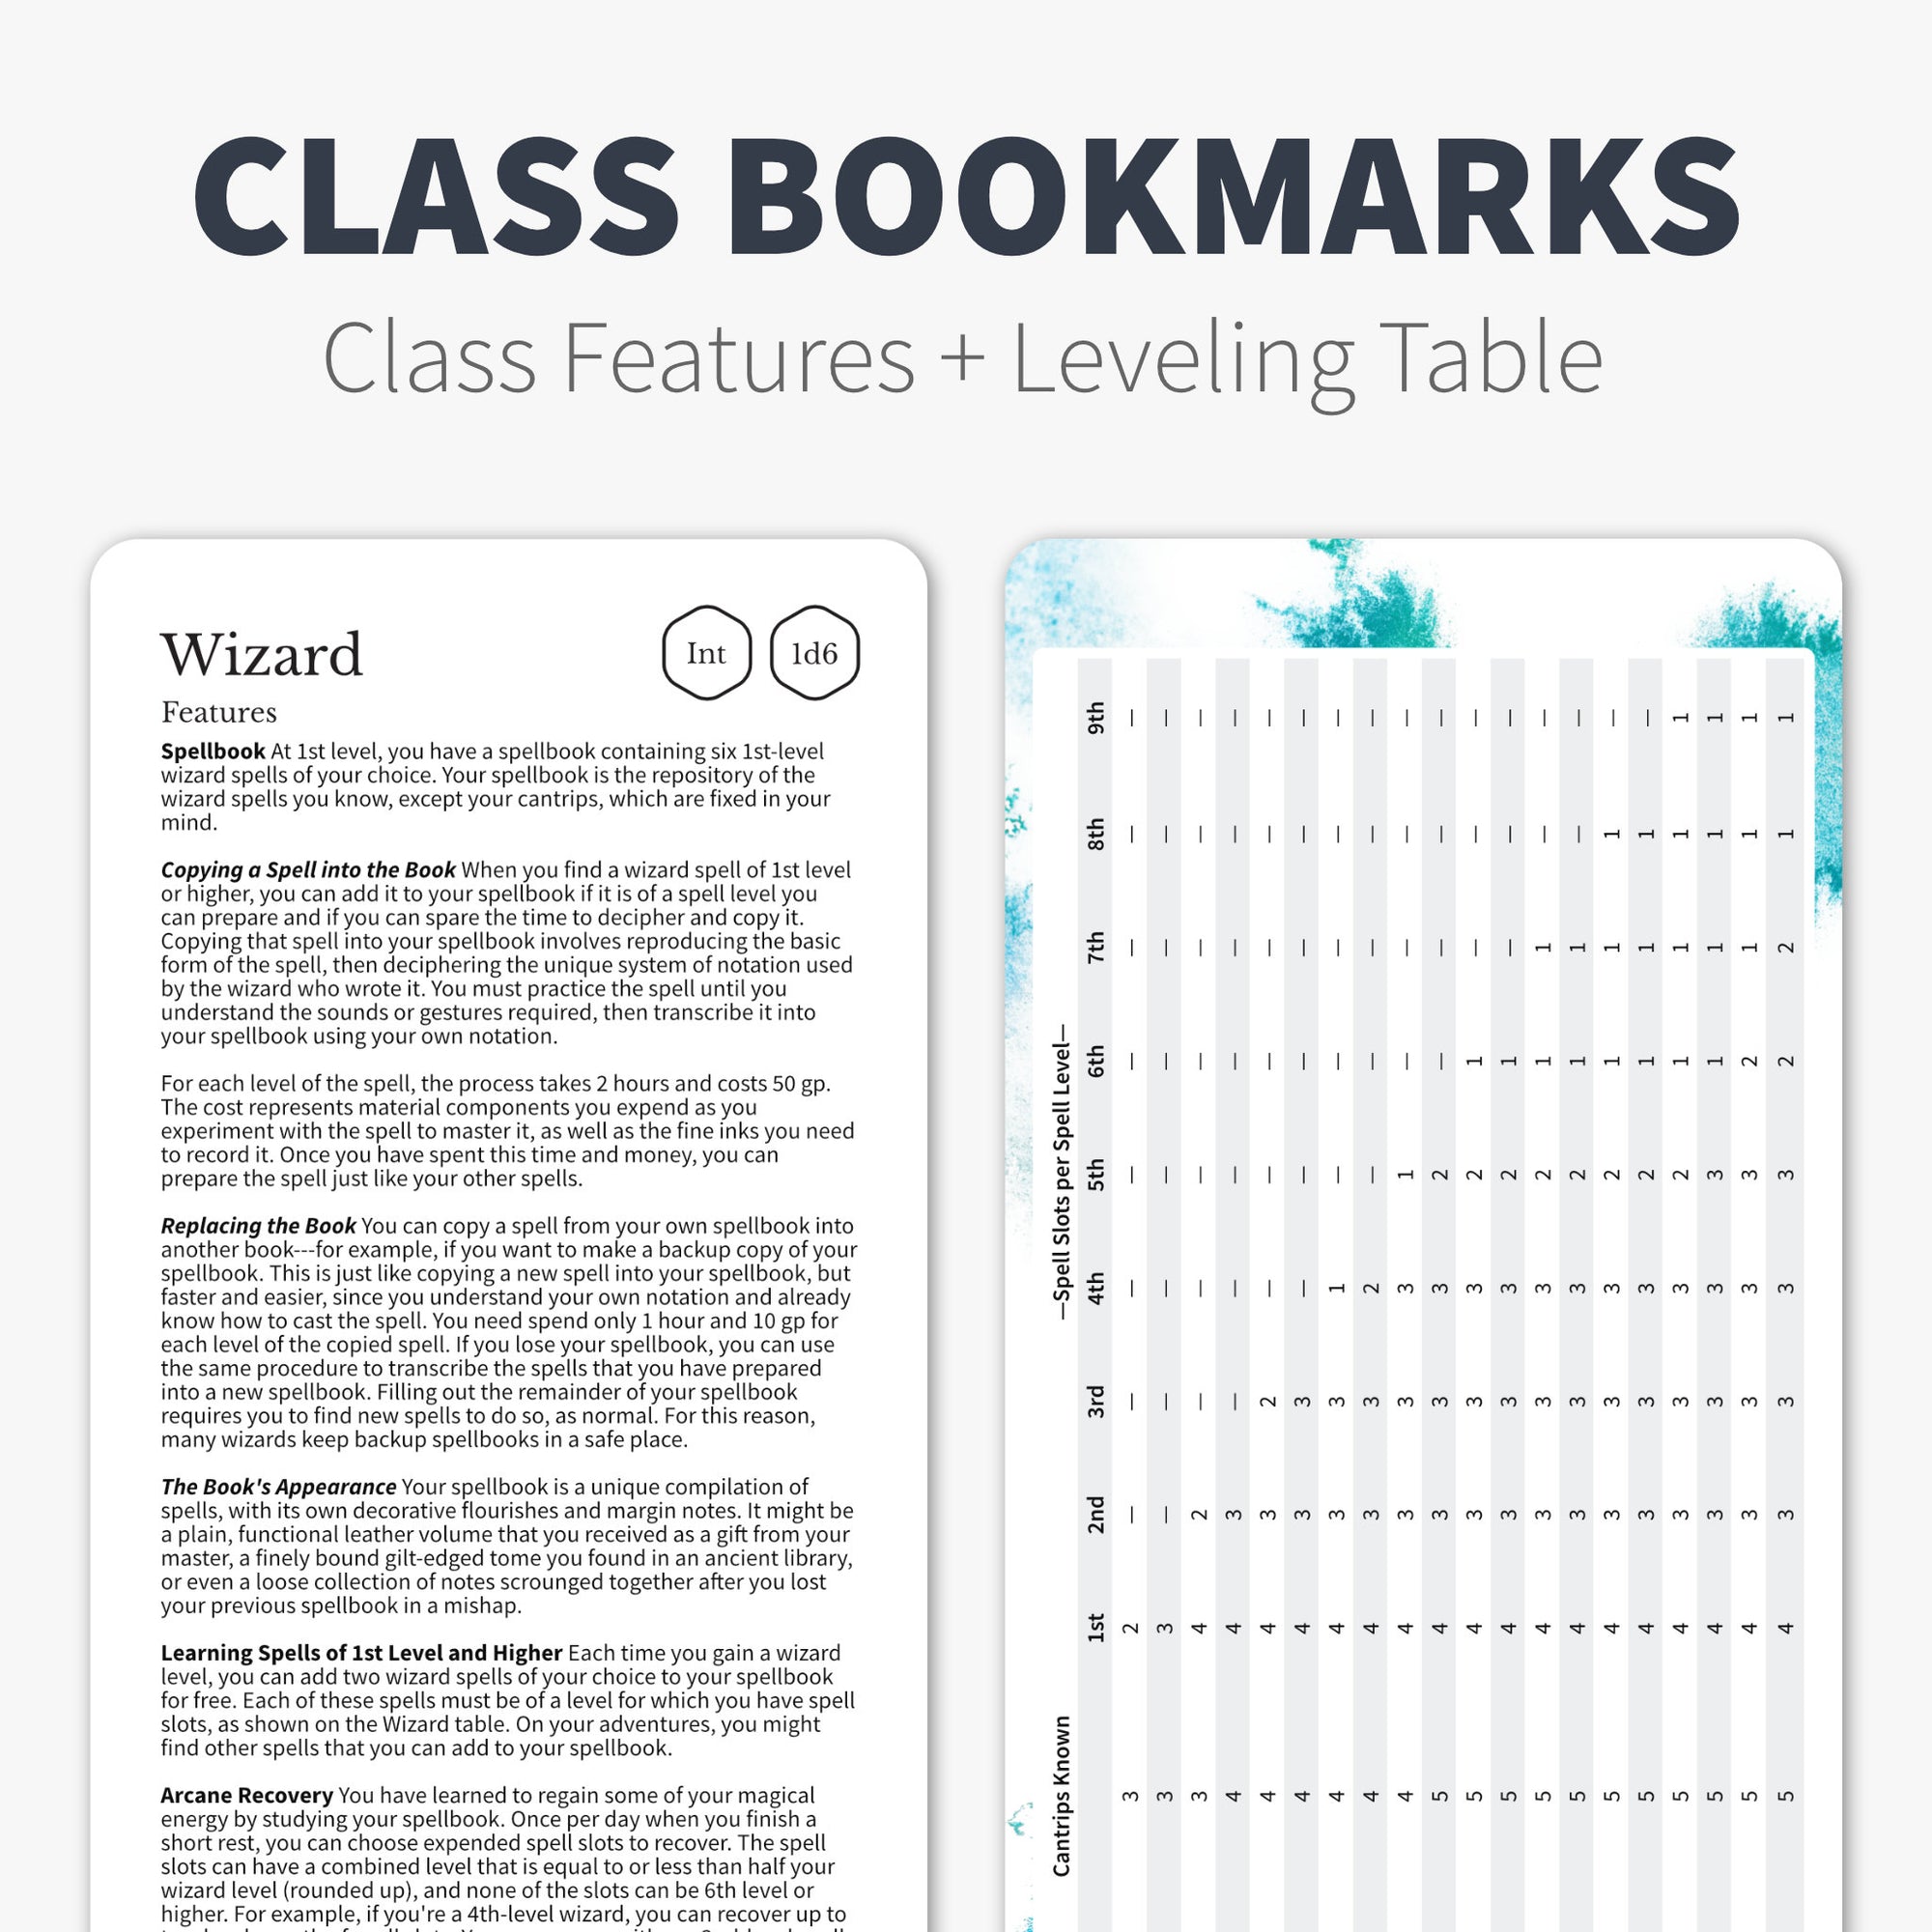 Class Bookmarks